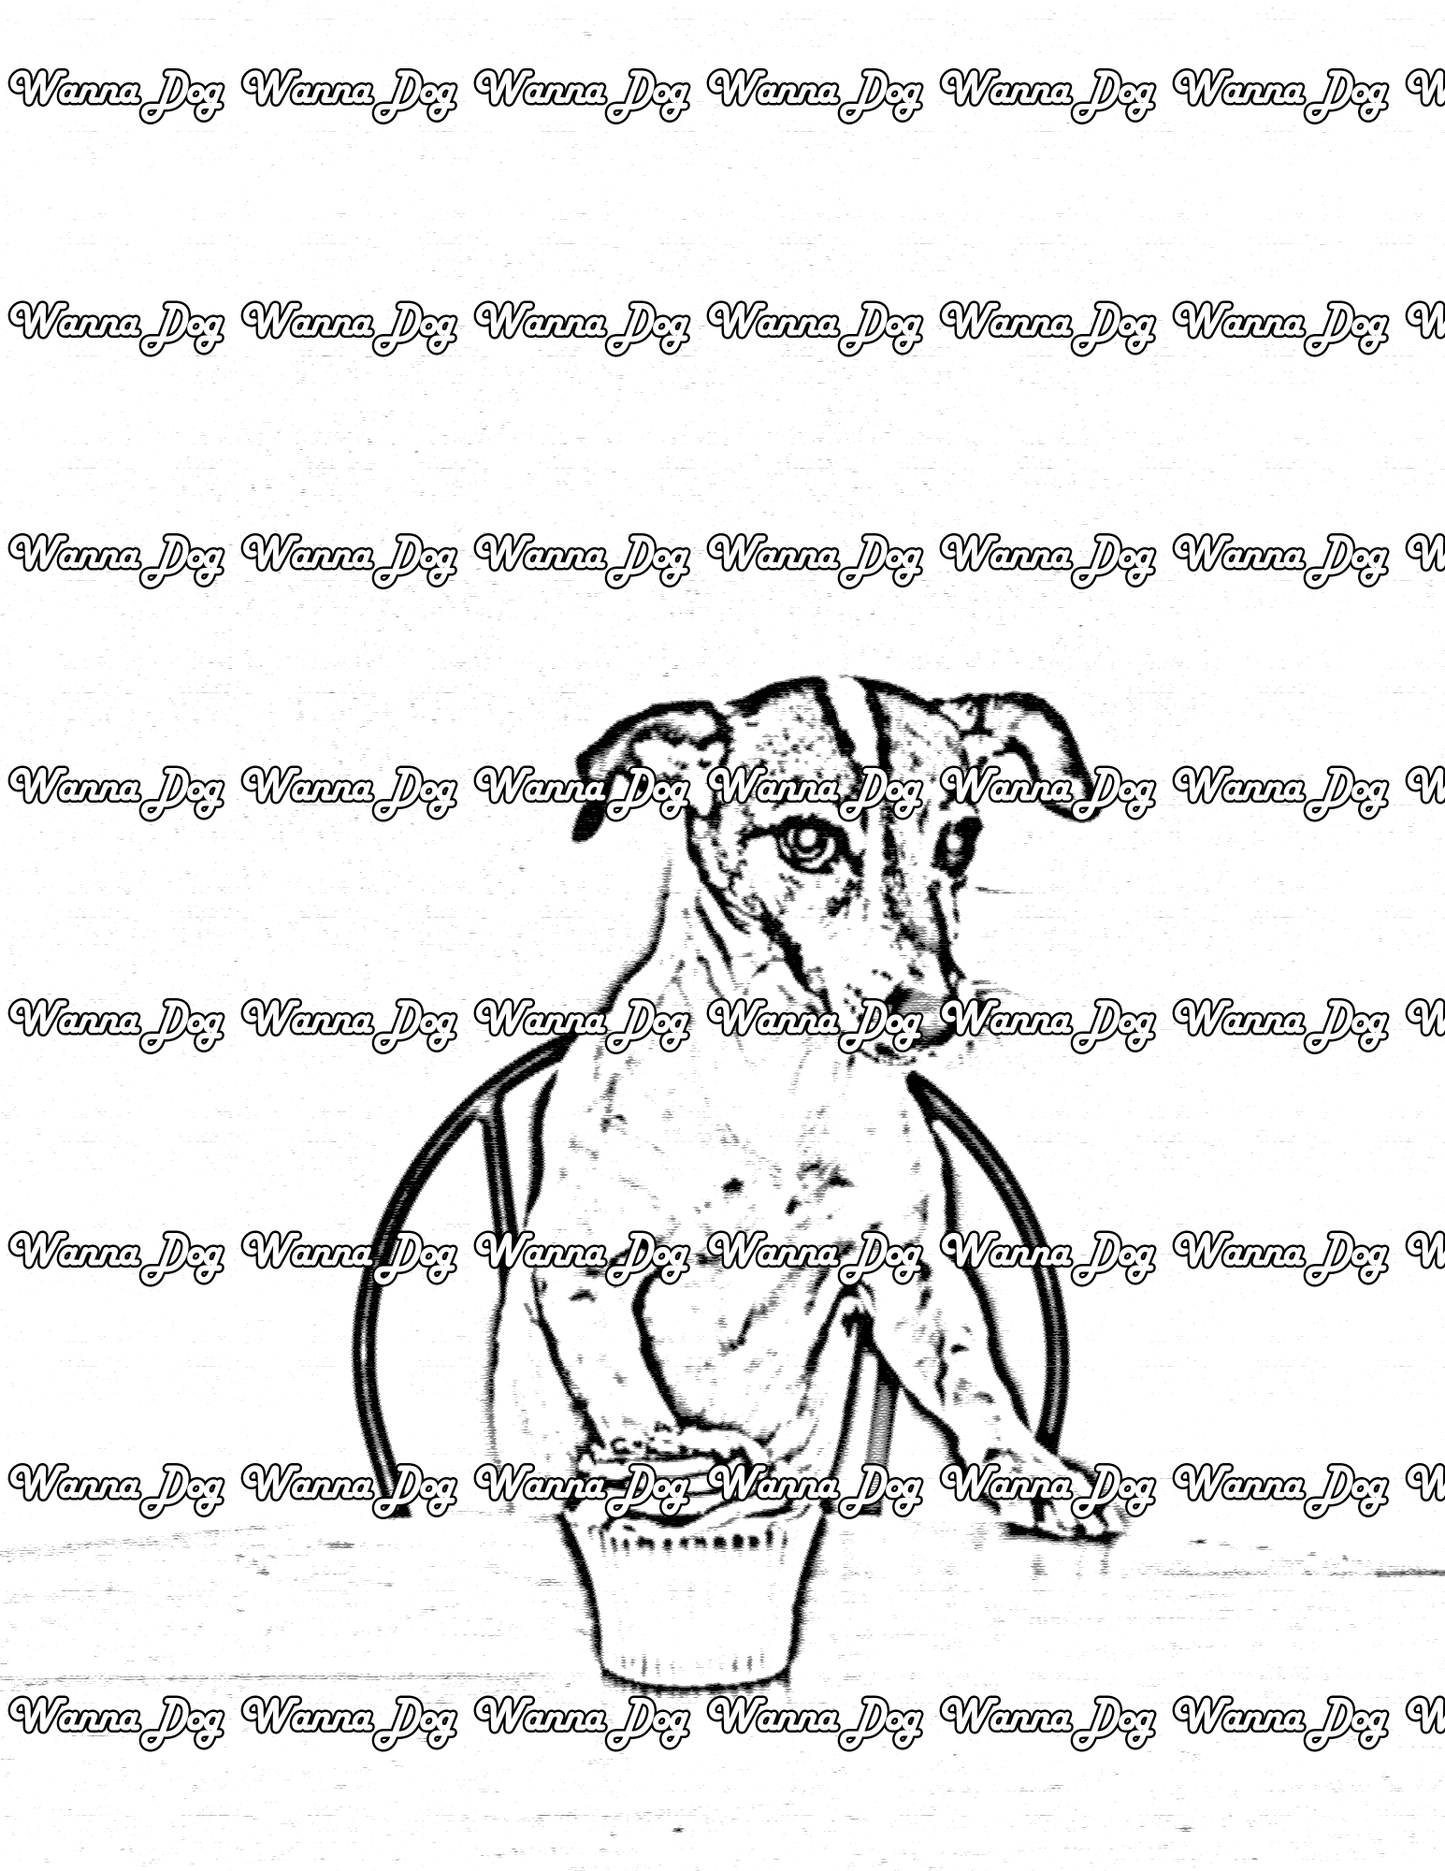 Jack Russell Terrier Coloring Page of a Jack Russell Terrier with a cupcake